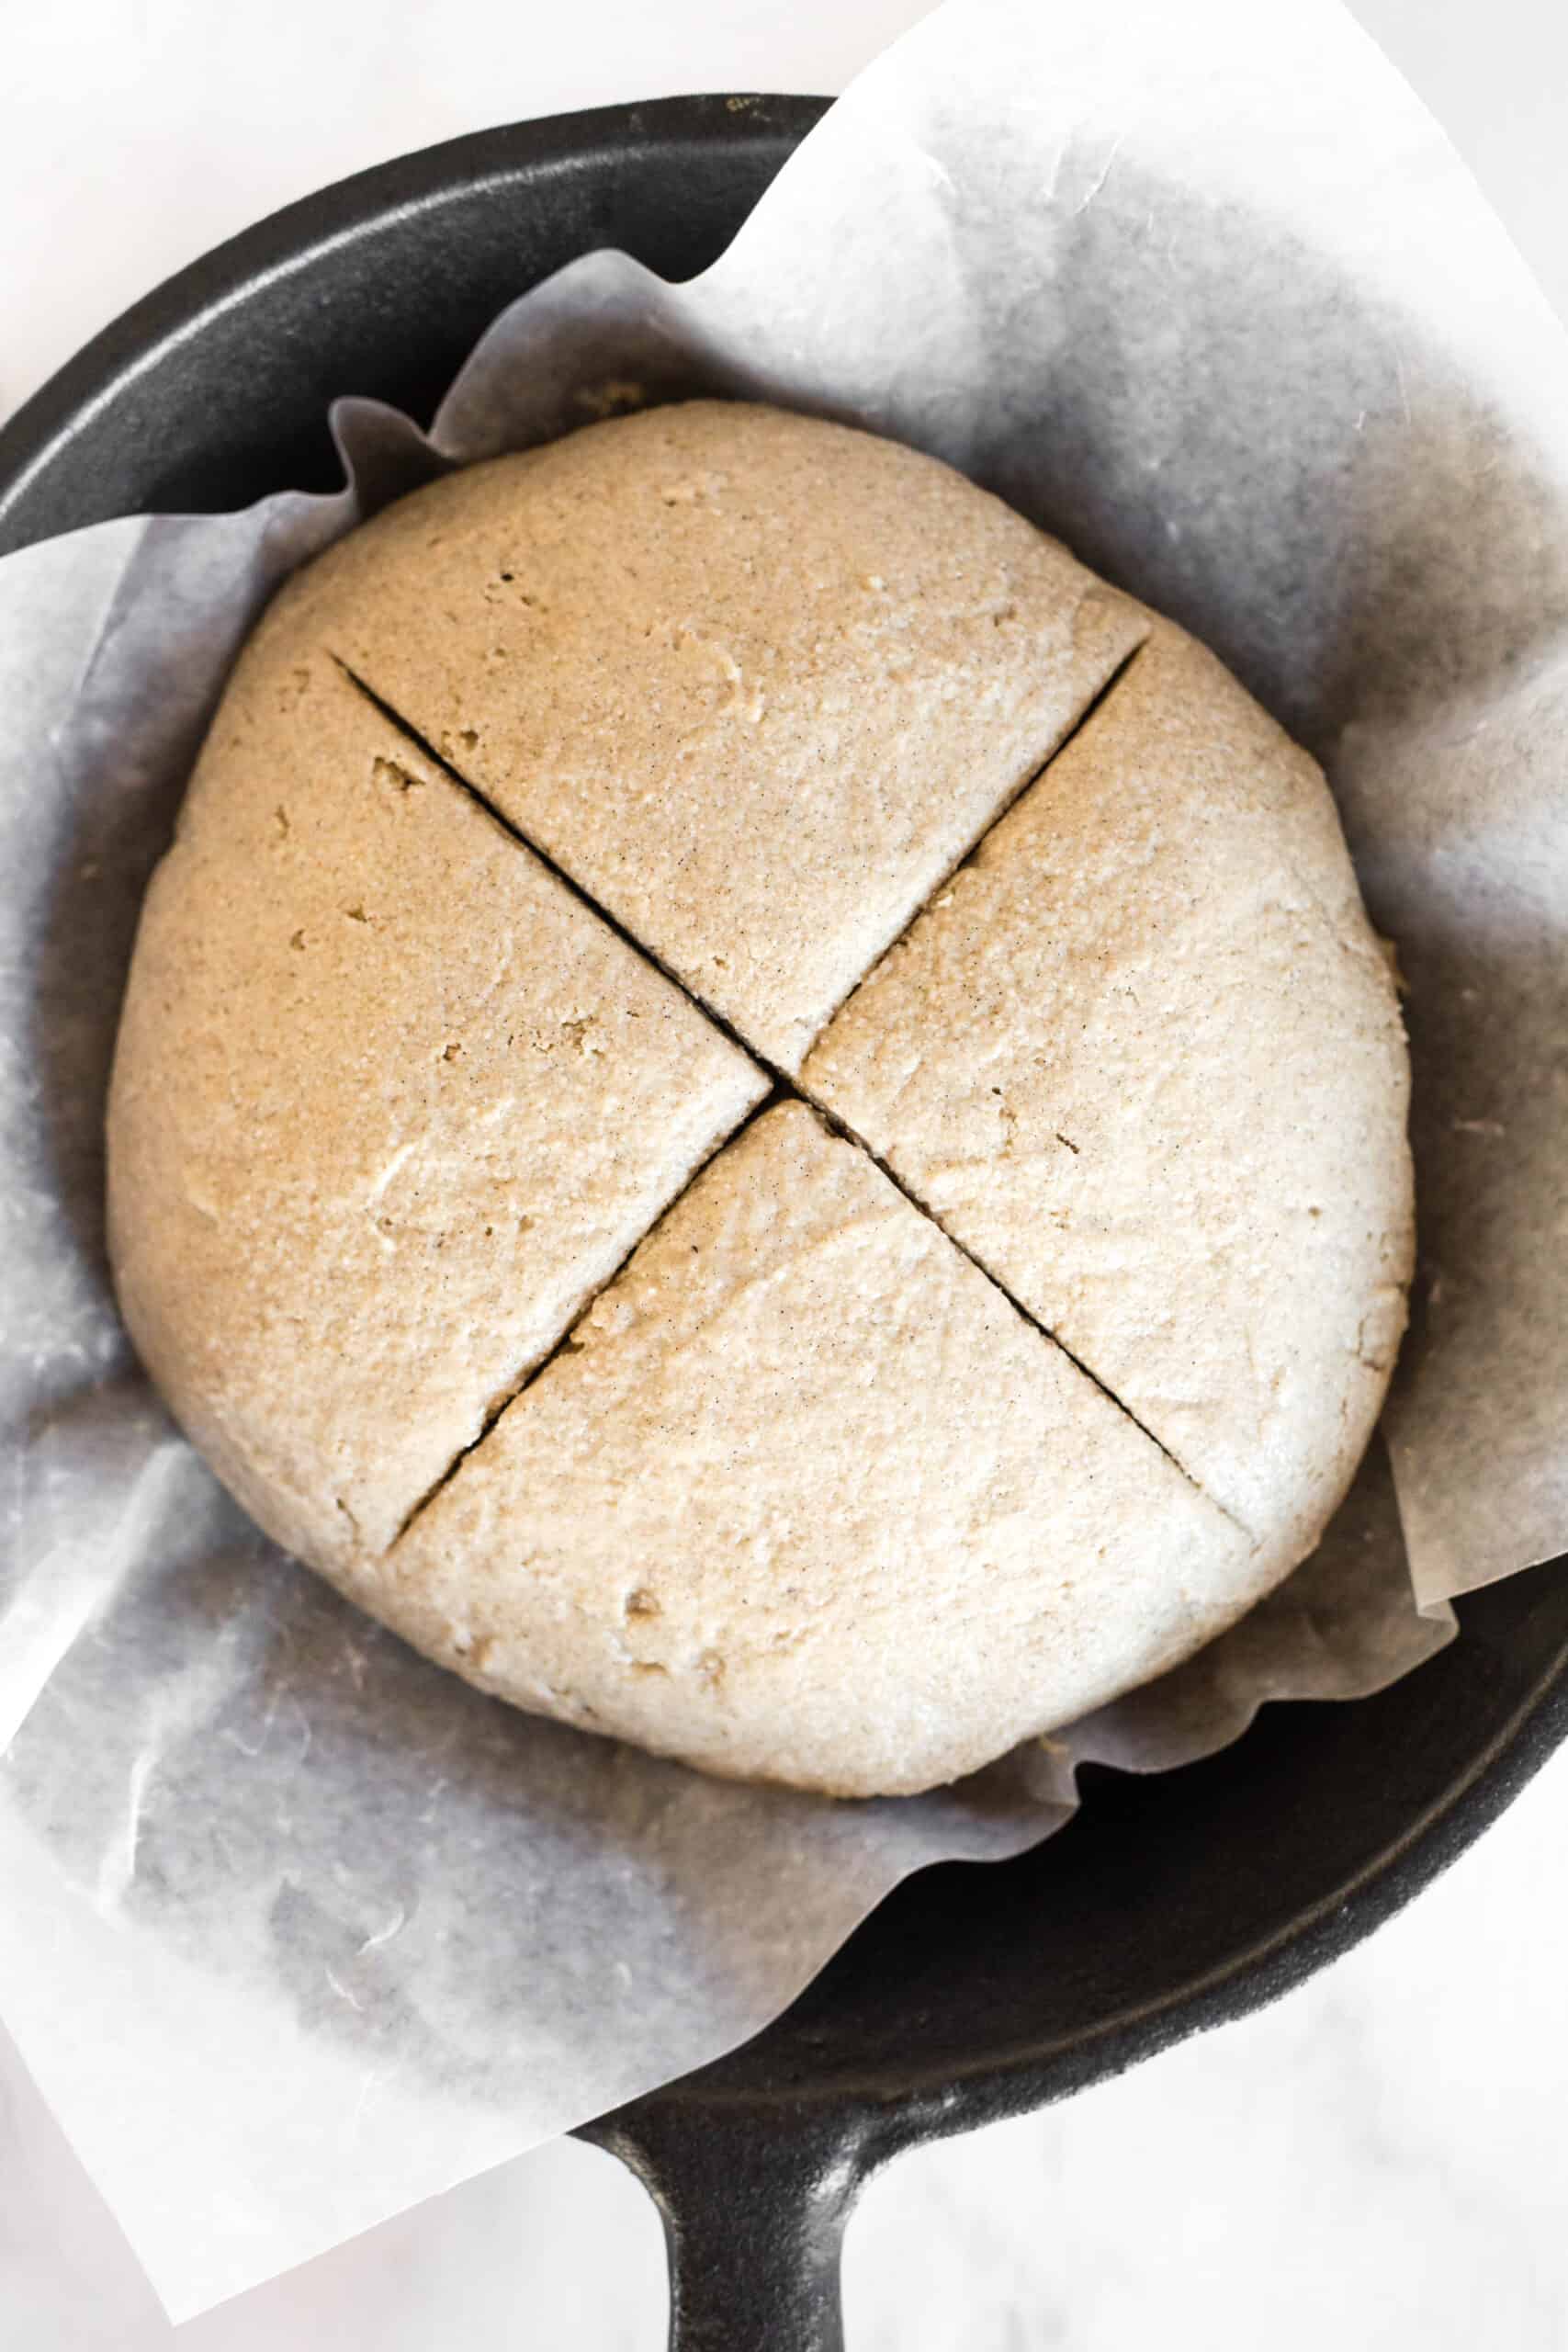 Bread dough with a cross cut on top of the dough.